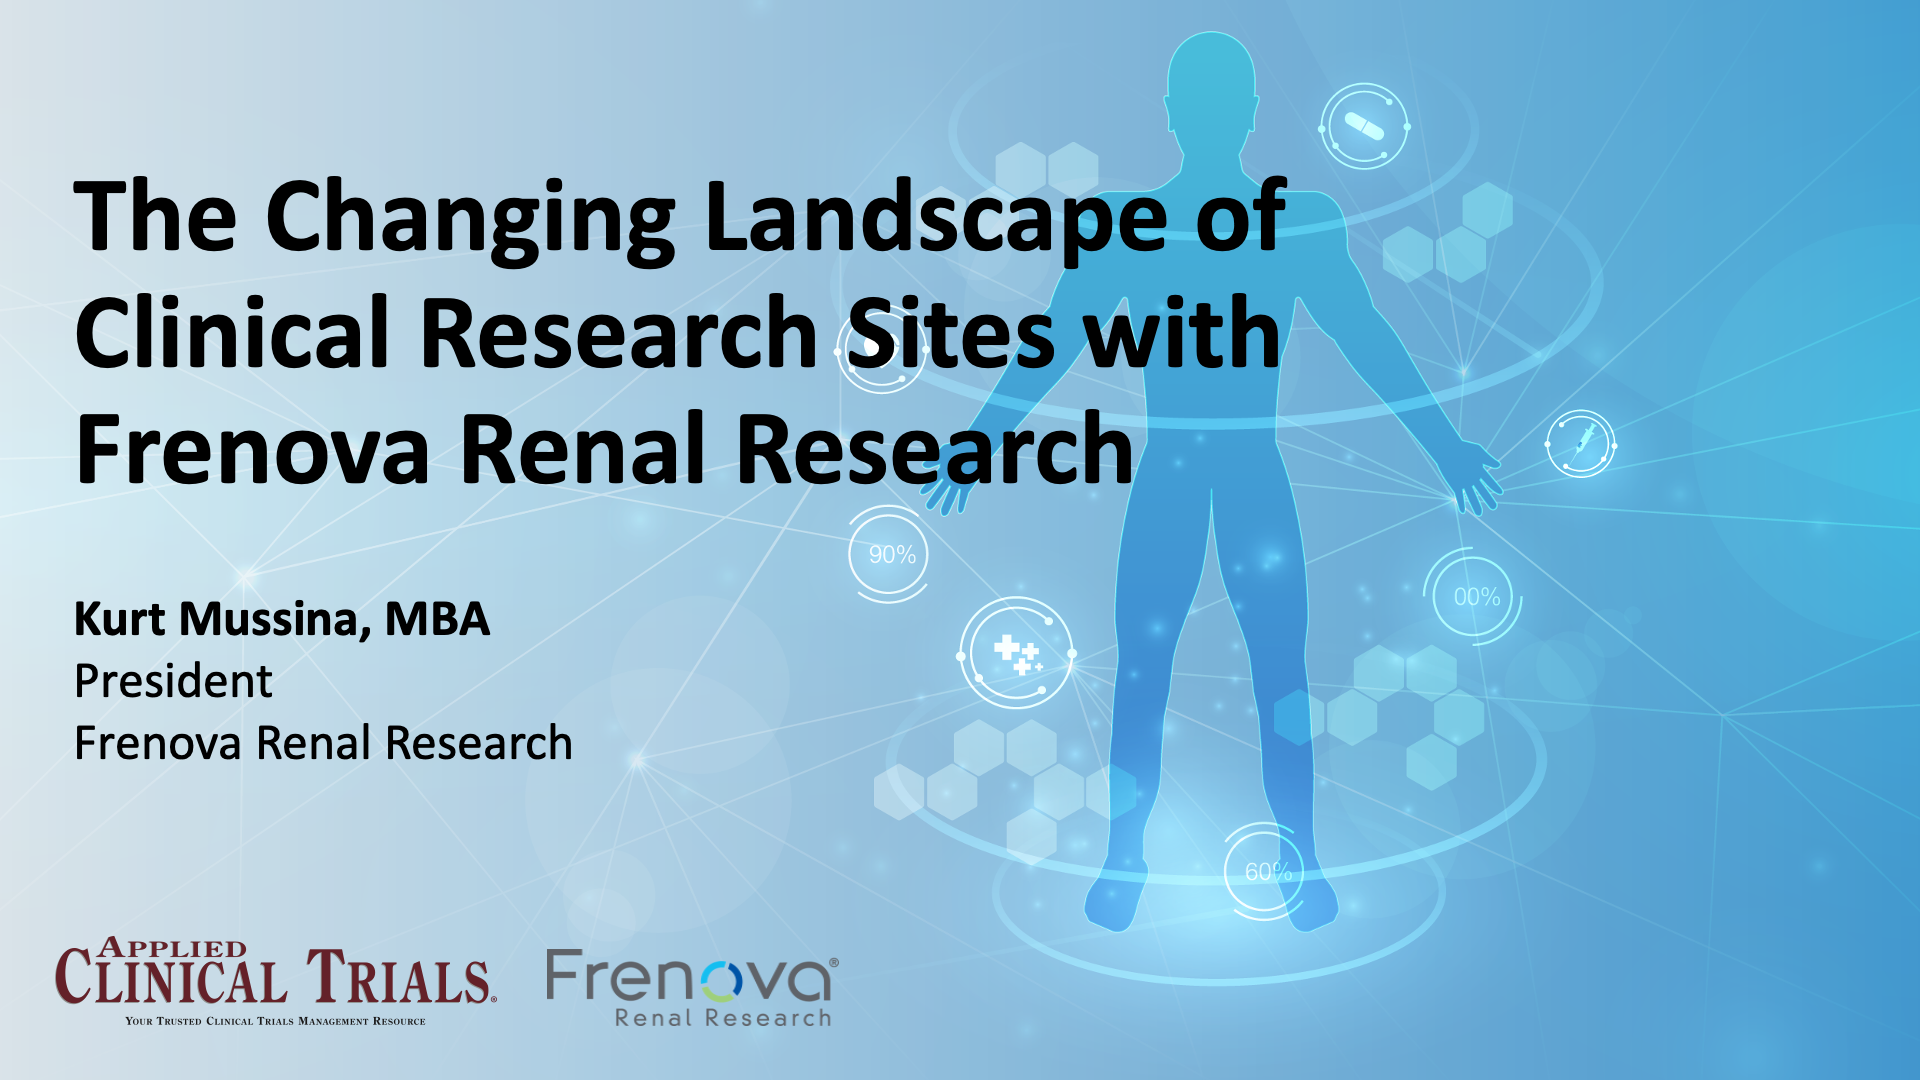 The Changing Landscape of Clinical Research Sites With Frenova Renal Research